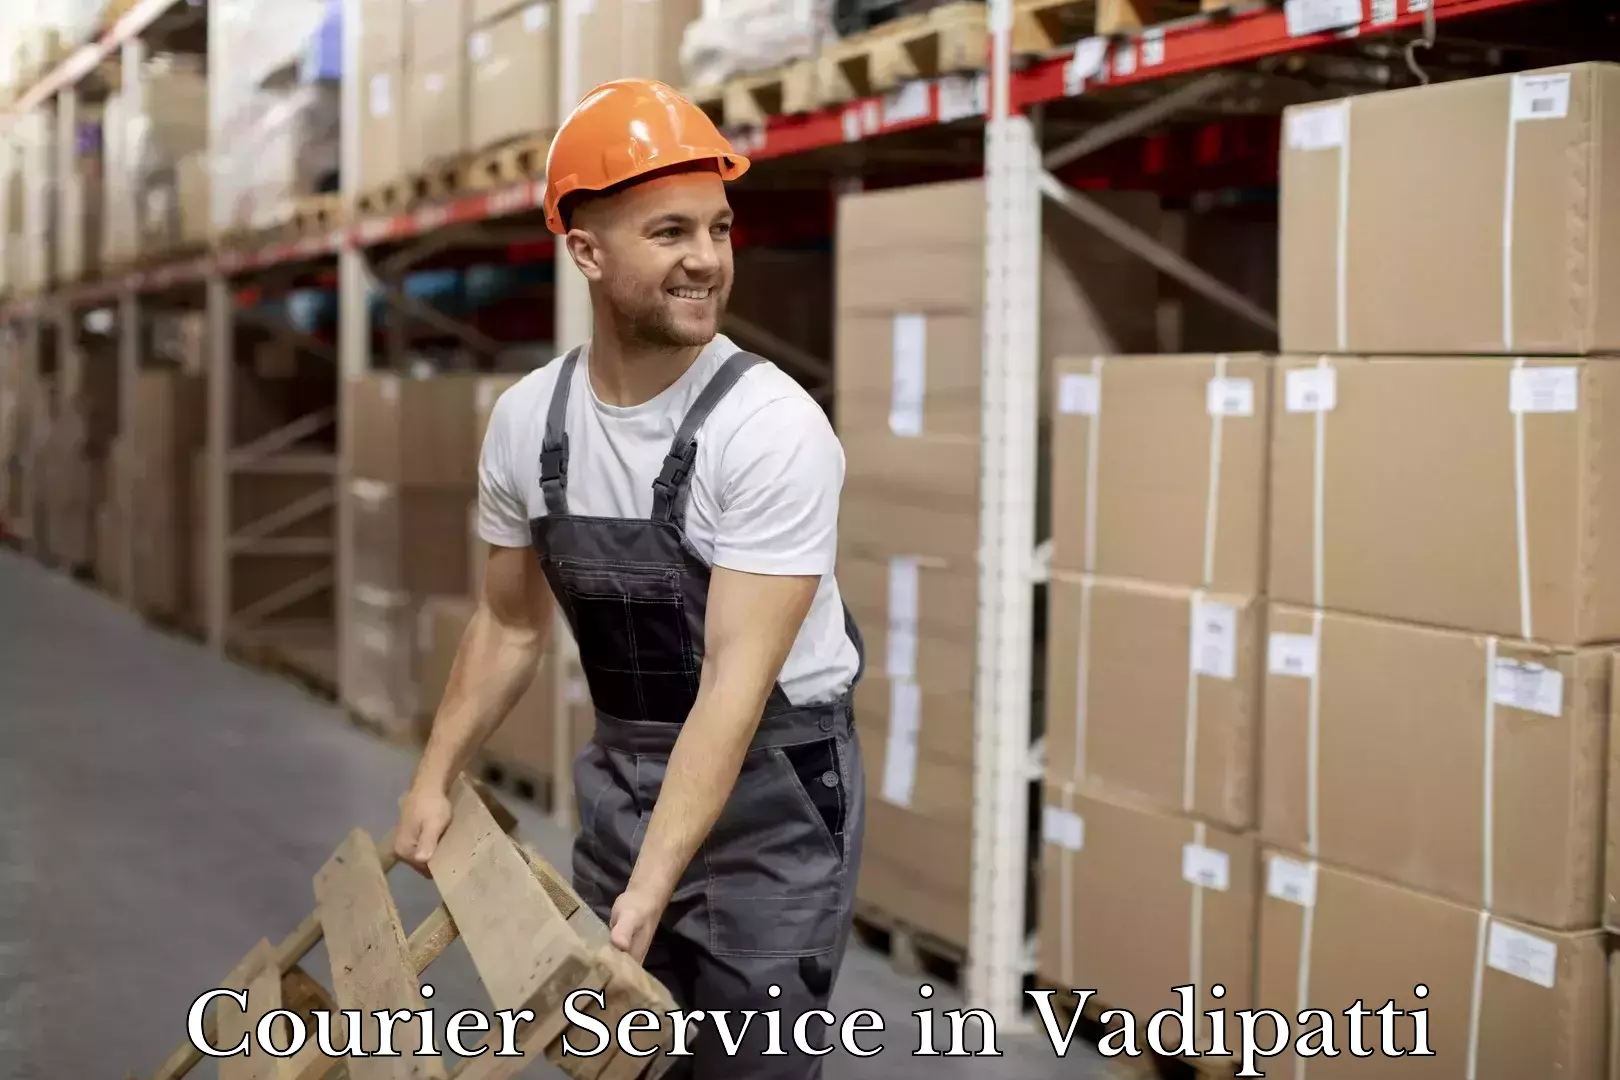 Expedited shipping methods in Vadipatti